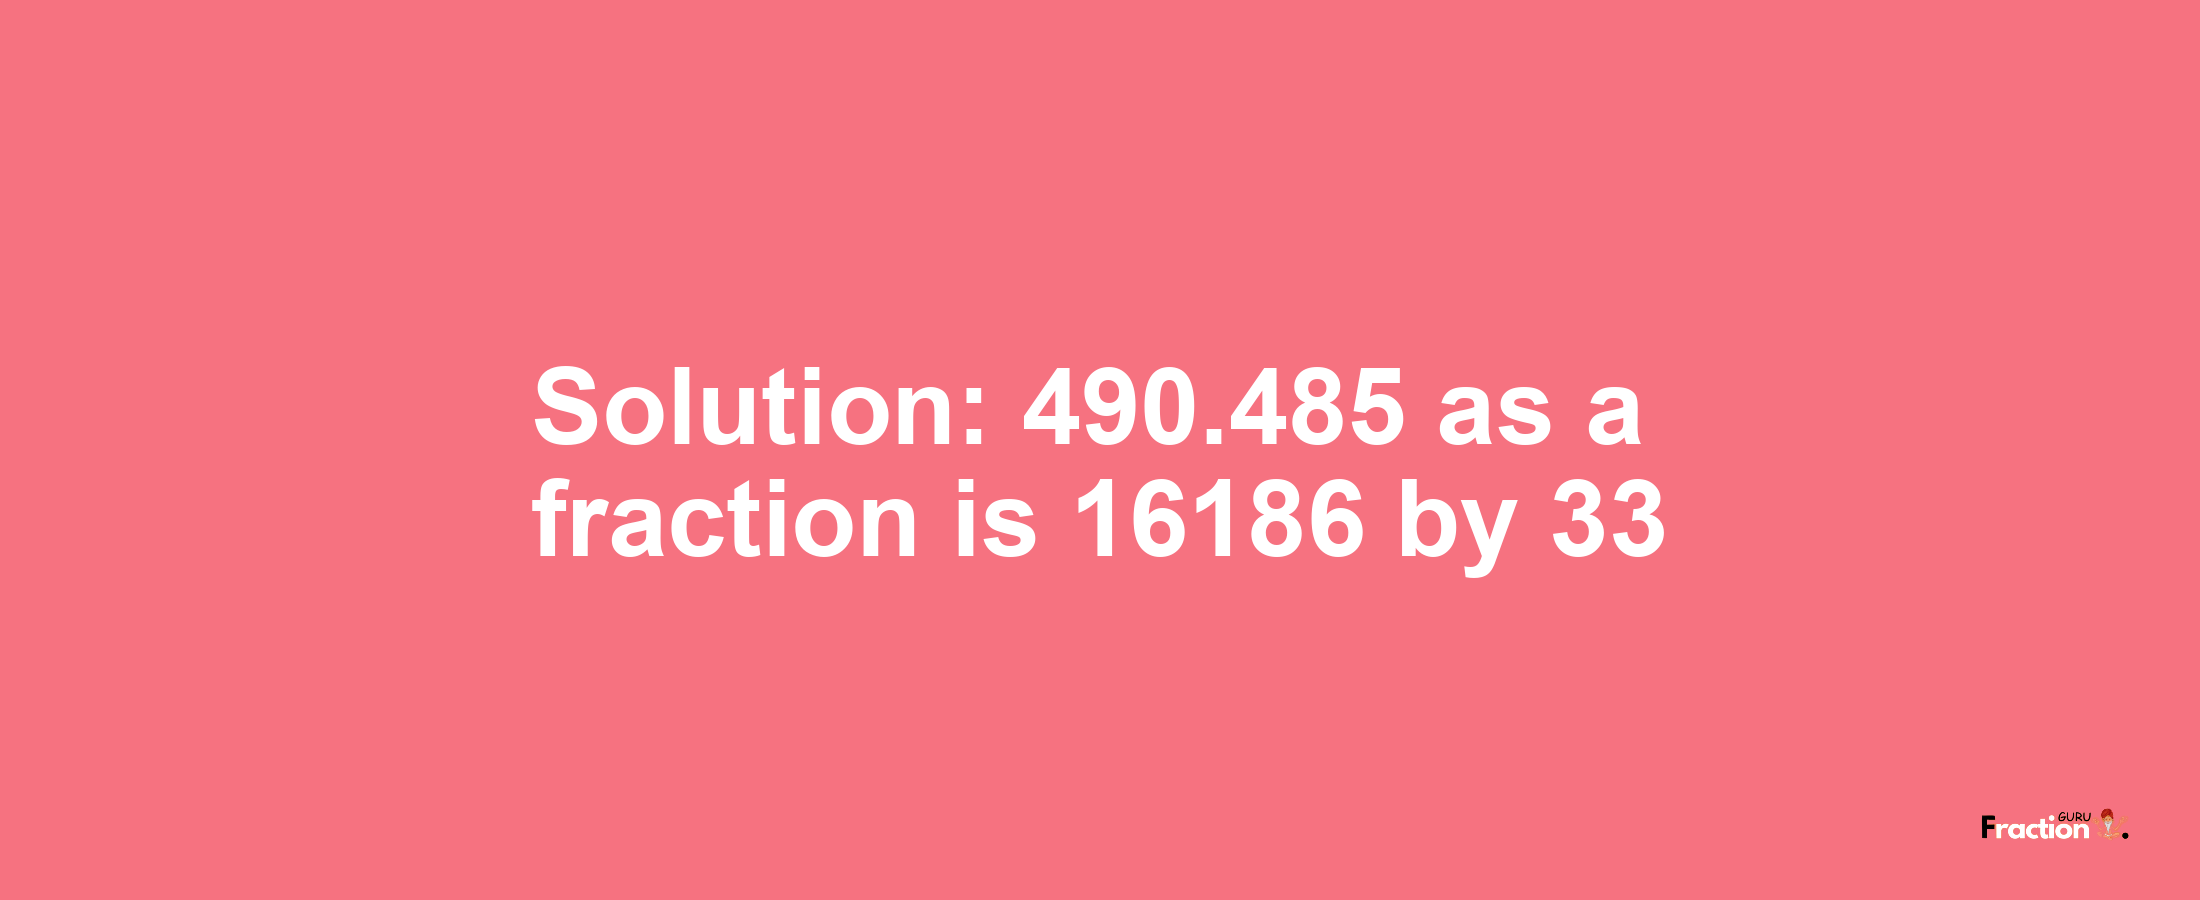 Solution:490.485 as a fraction is 16186/33